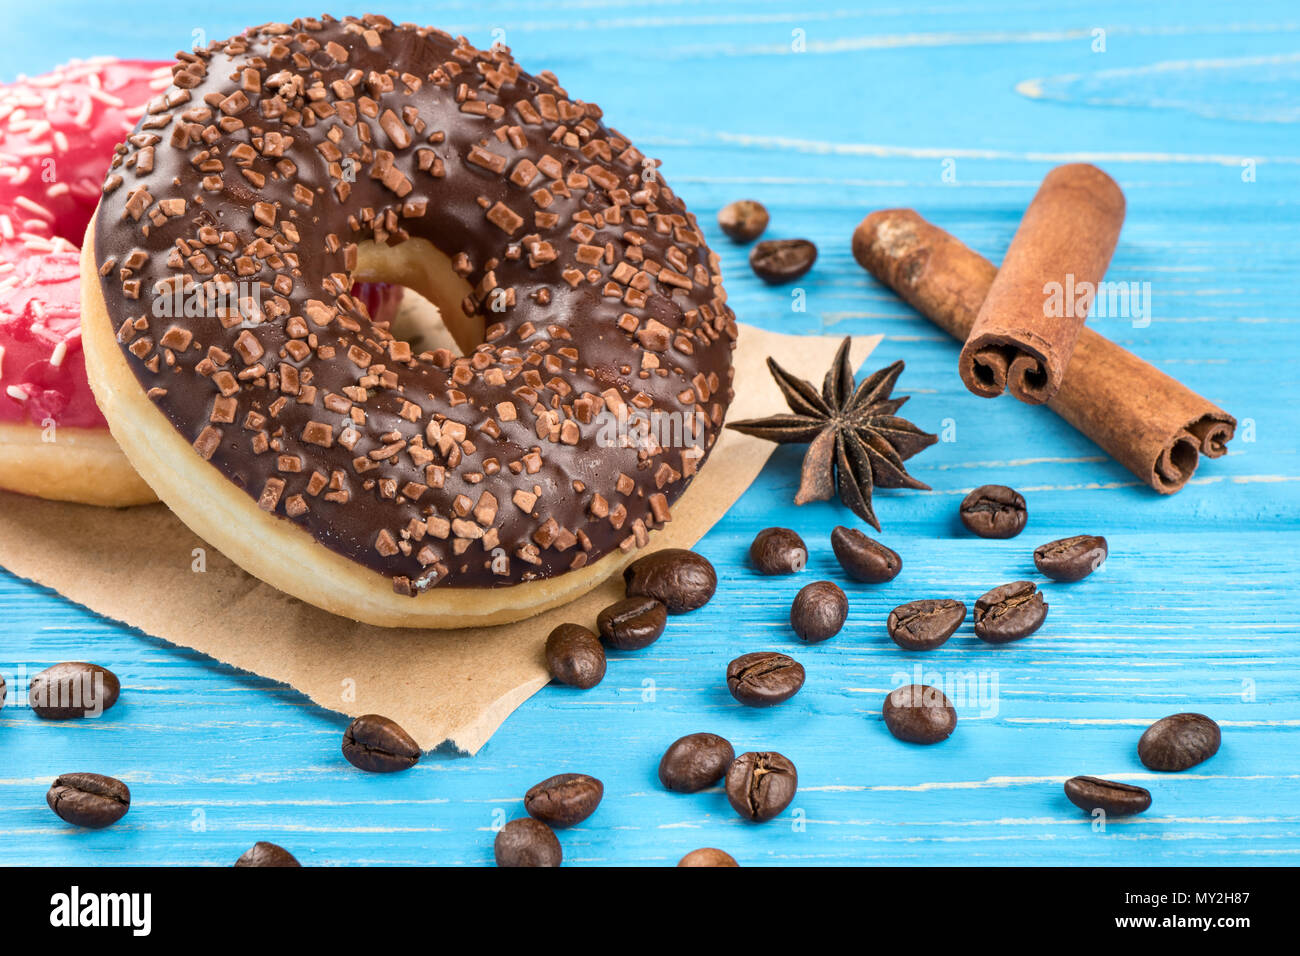 Chocolate donut with scattered grains of coffee close-up on the table Stock Photo